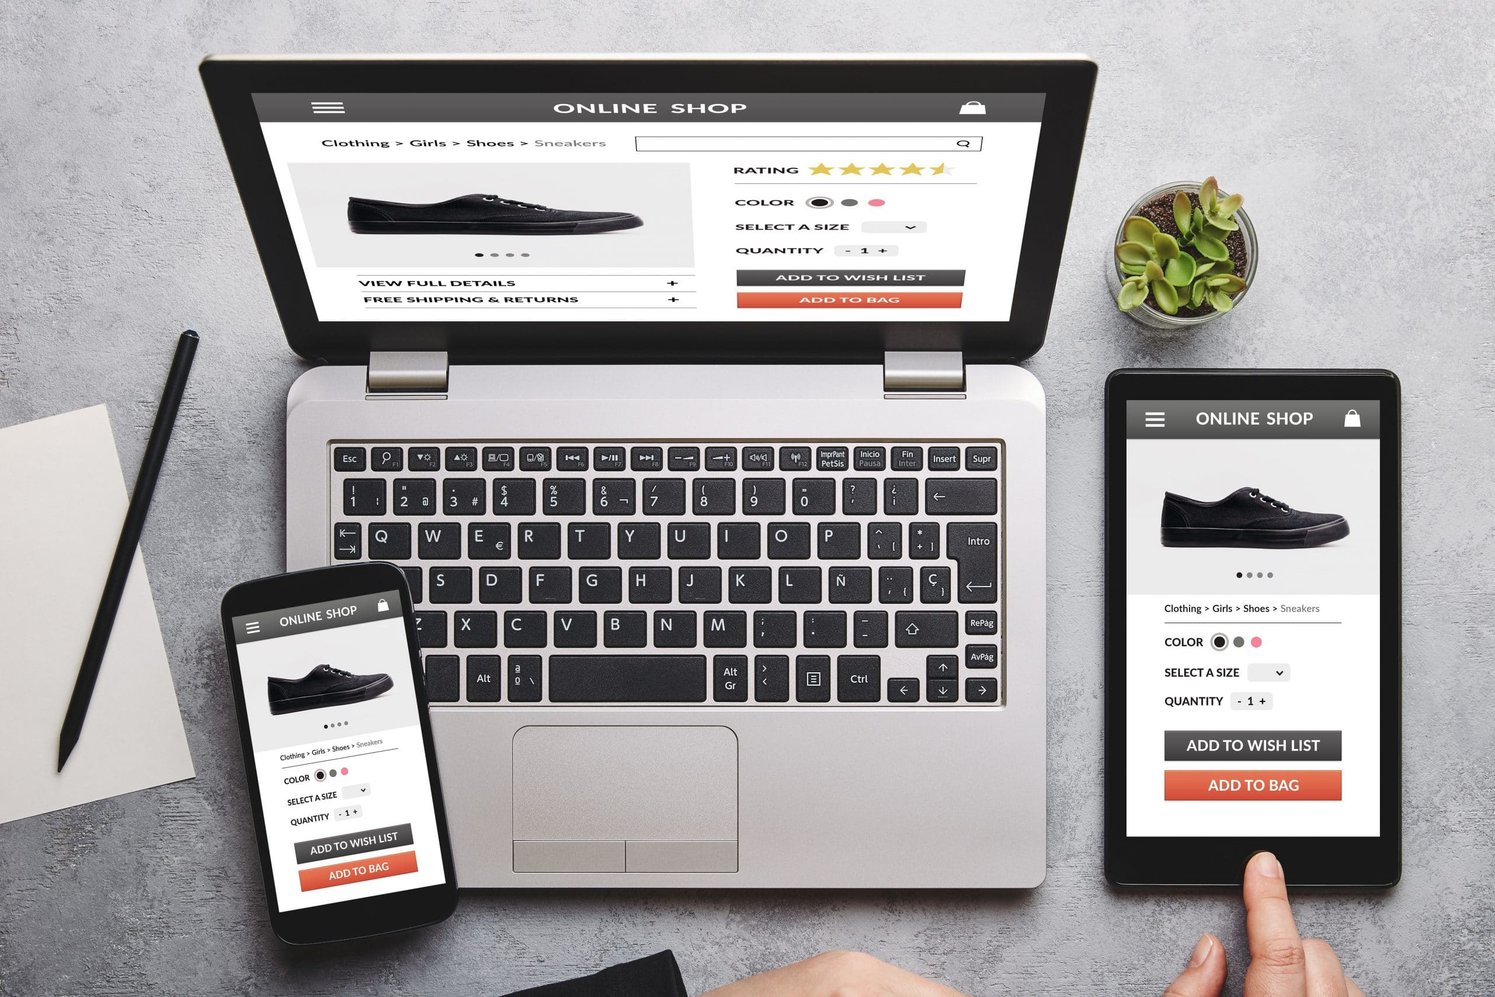 Computer, phone, and tablet showing the same page about shoes in different formats 